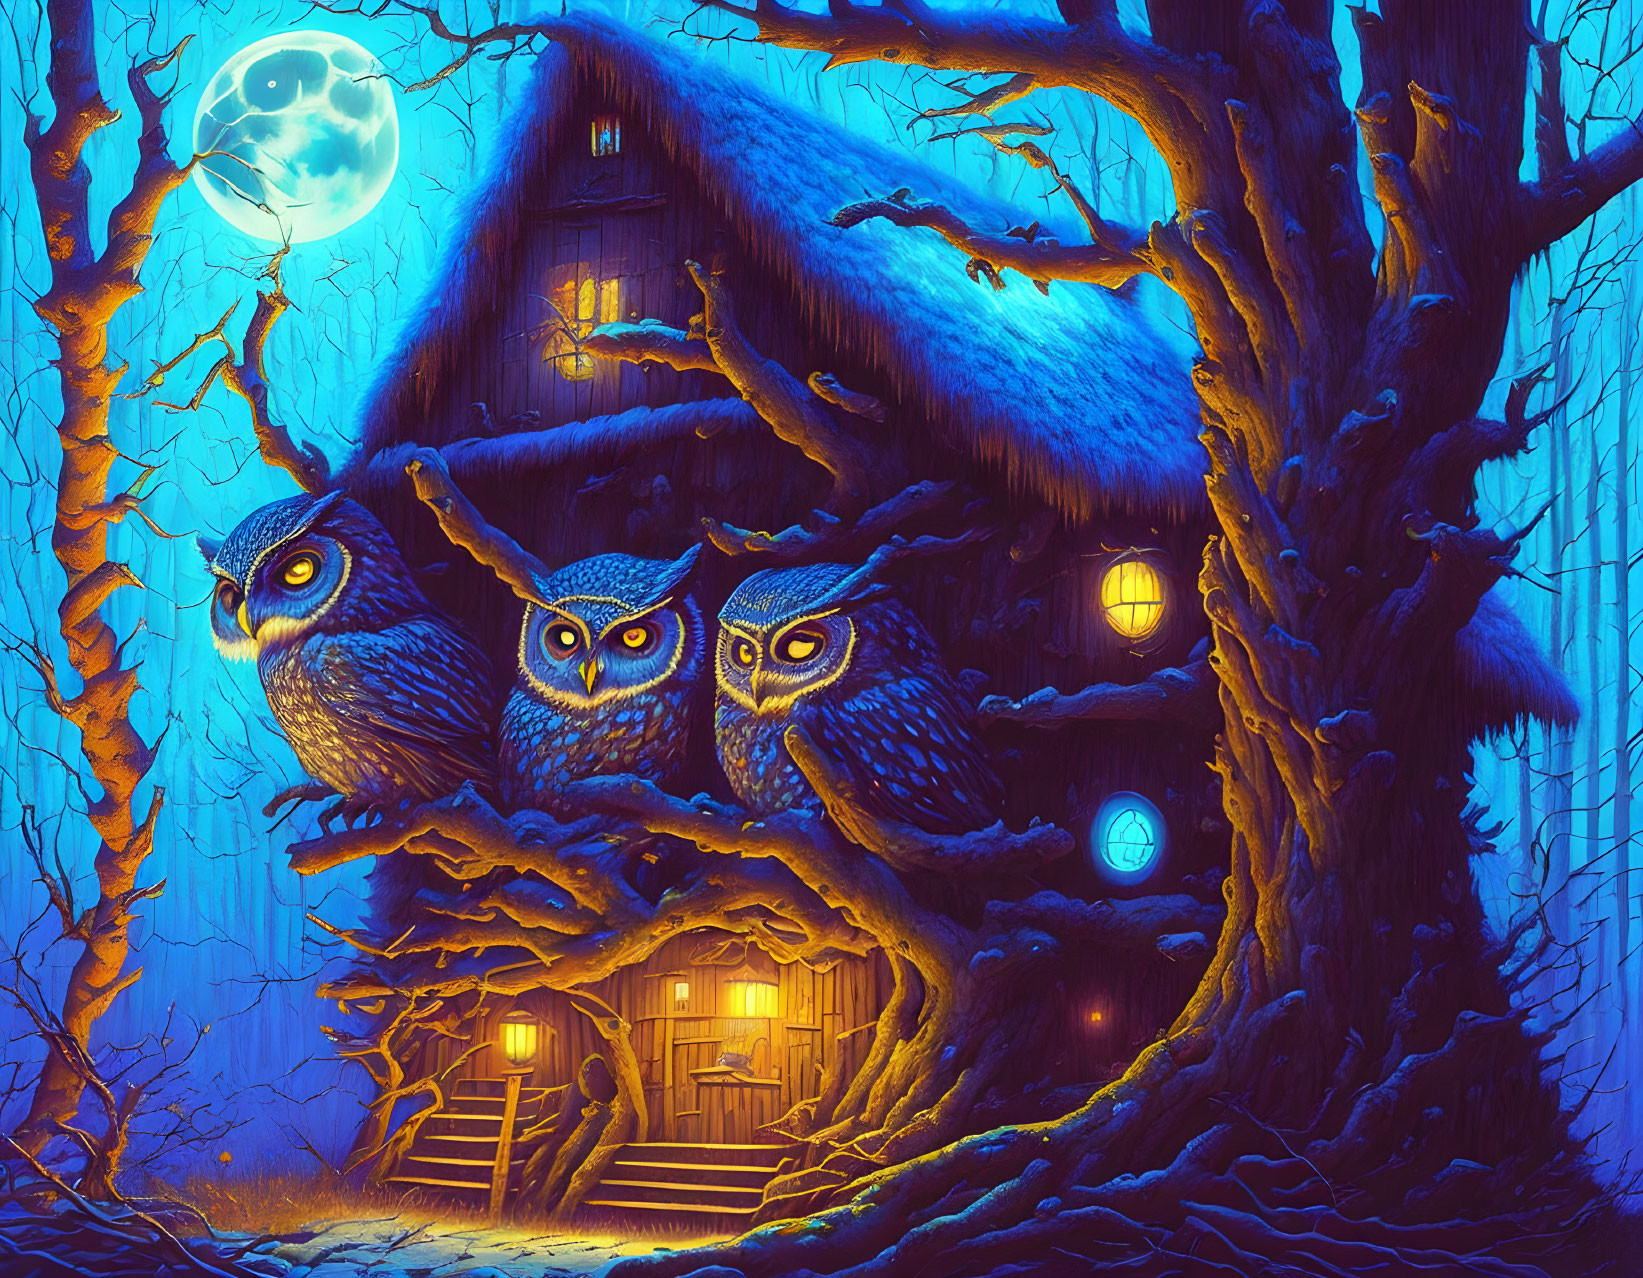 Night. Forest. The hut. Owls